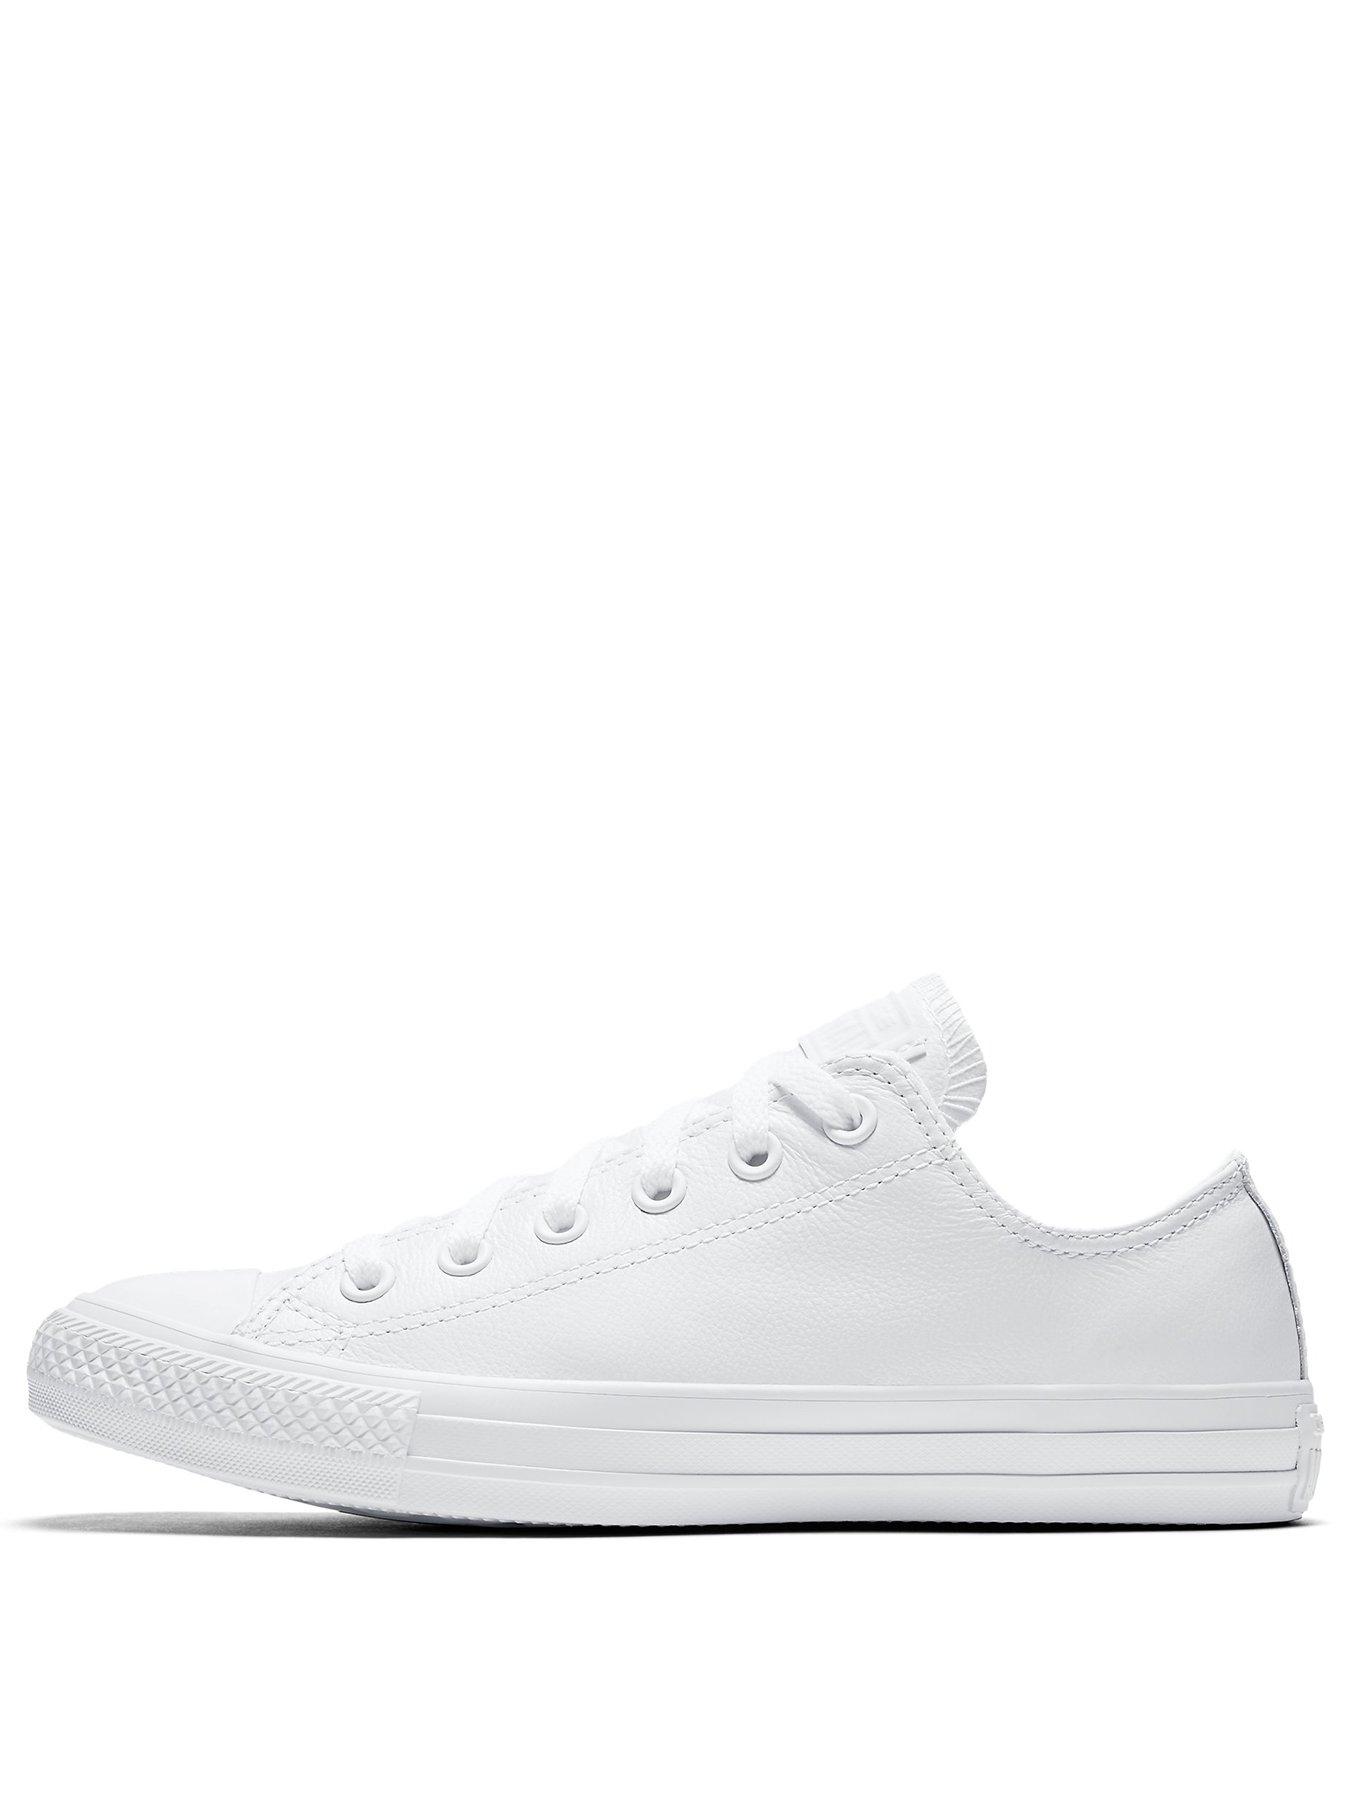 converse mens white trainers 